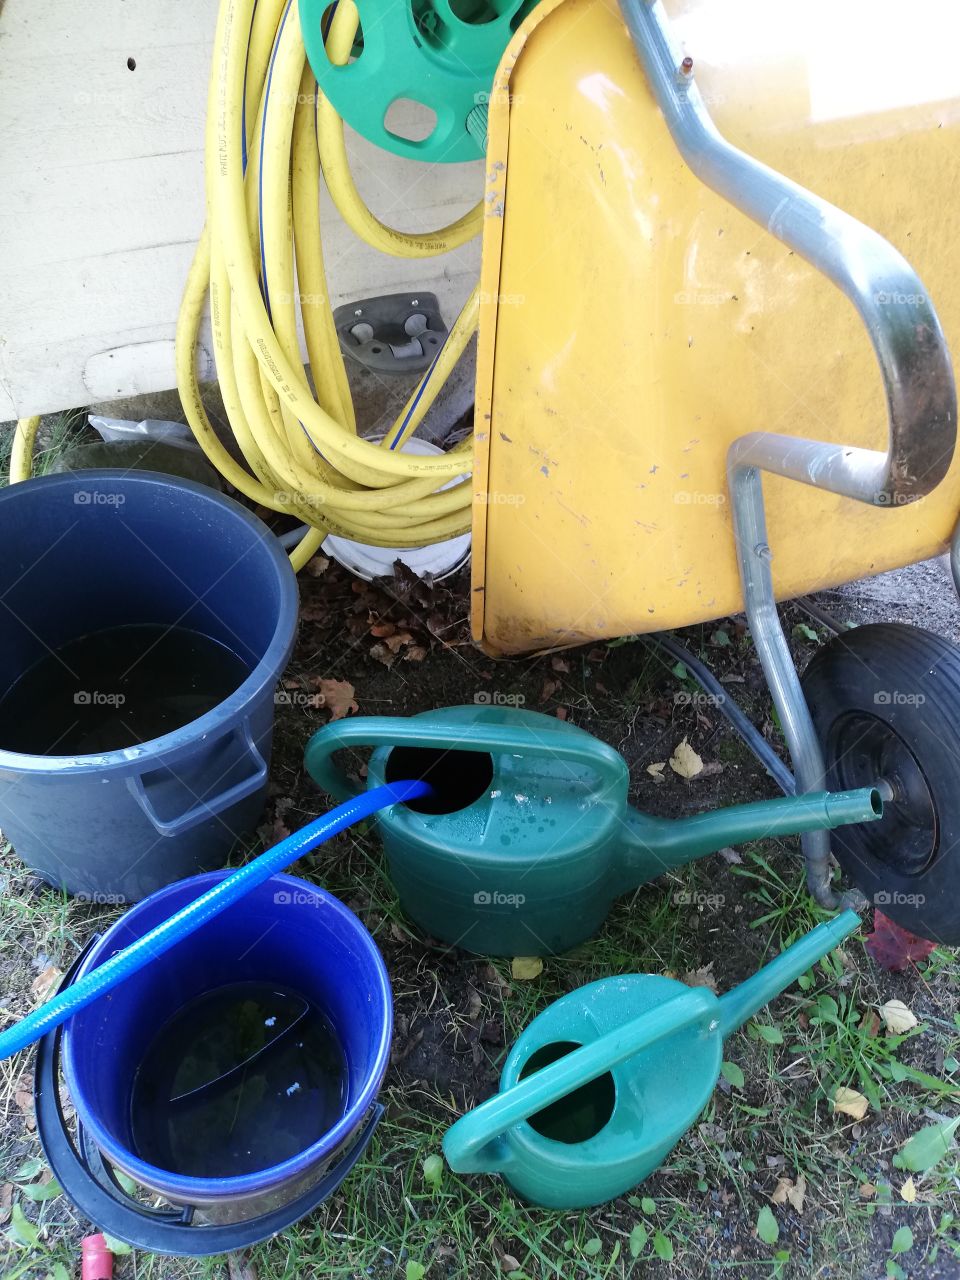 A yellow wheelbarrow with a black tyre leaning on a white wall. A bucket, a tub and one watering can are half filled with water. In one pitcher is a blue garden hose filling it up. Another tube hanging on the wall.